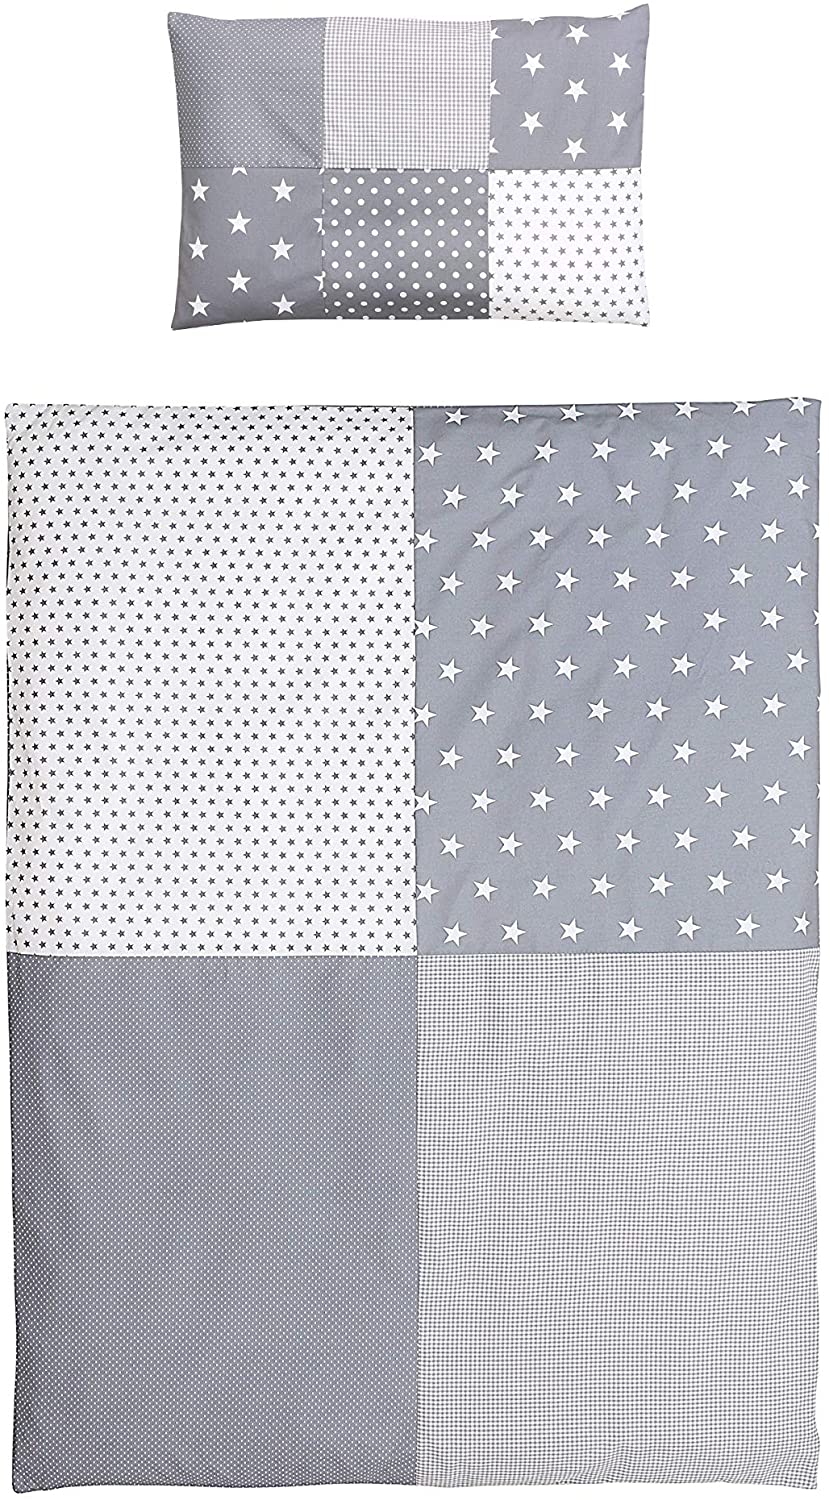 ULLENBOOM ® Children\'s Bed Linen 100 x 135 cm Grey Stars (Made in EU) - Pillowcase (40 x 60 cm) and Duvet Cover (100 x 135 cm) - Cotton Bedding for Children and Babies - Patchwork Design